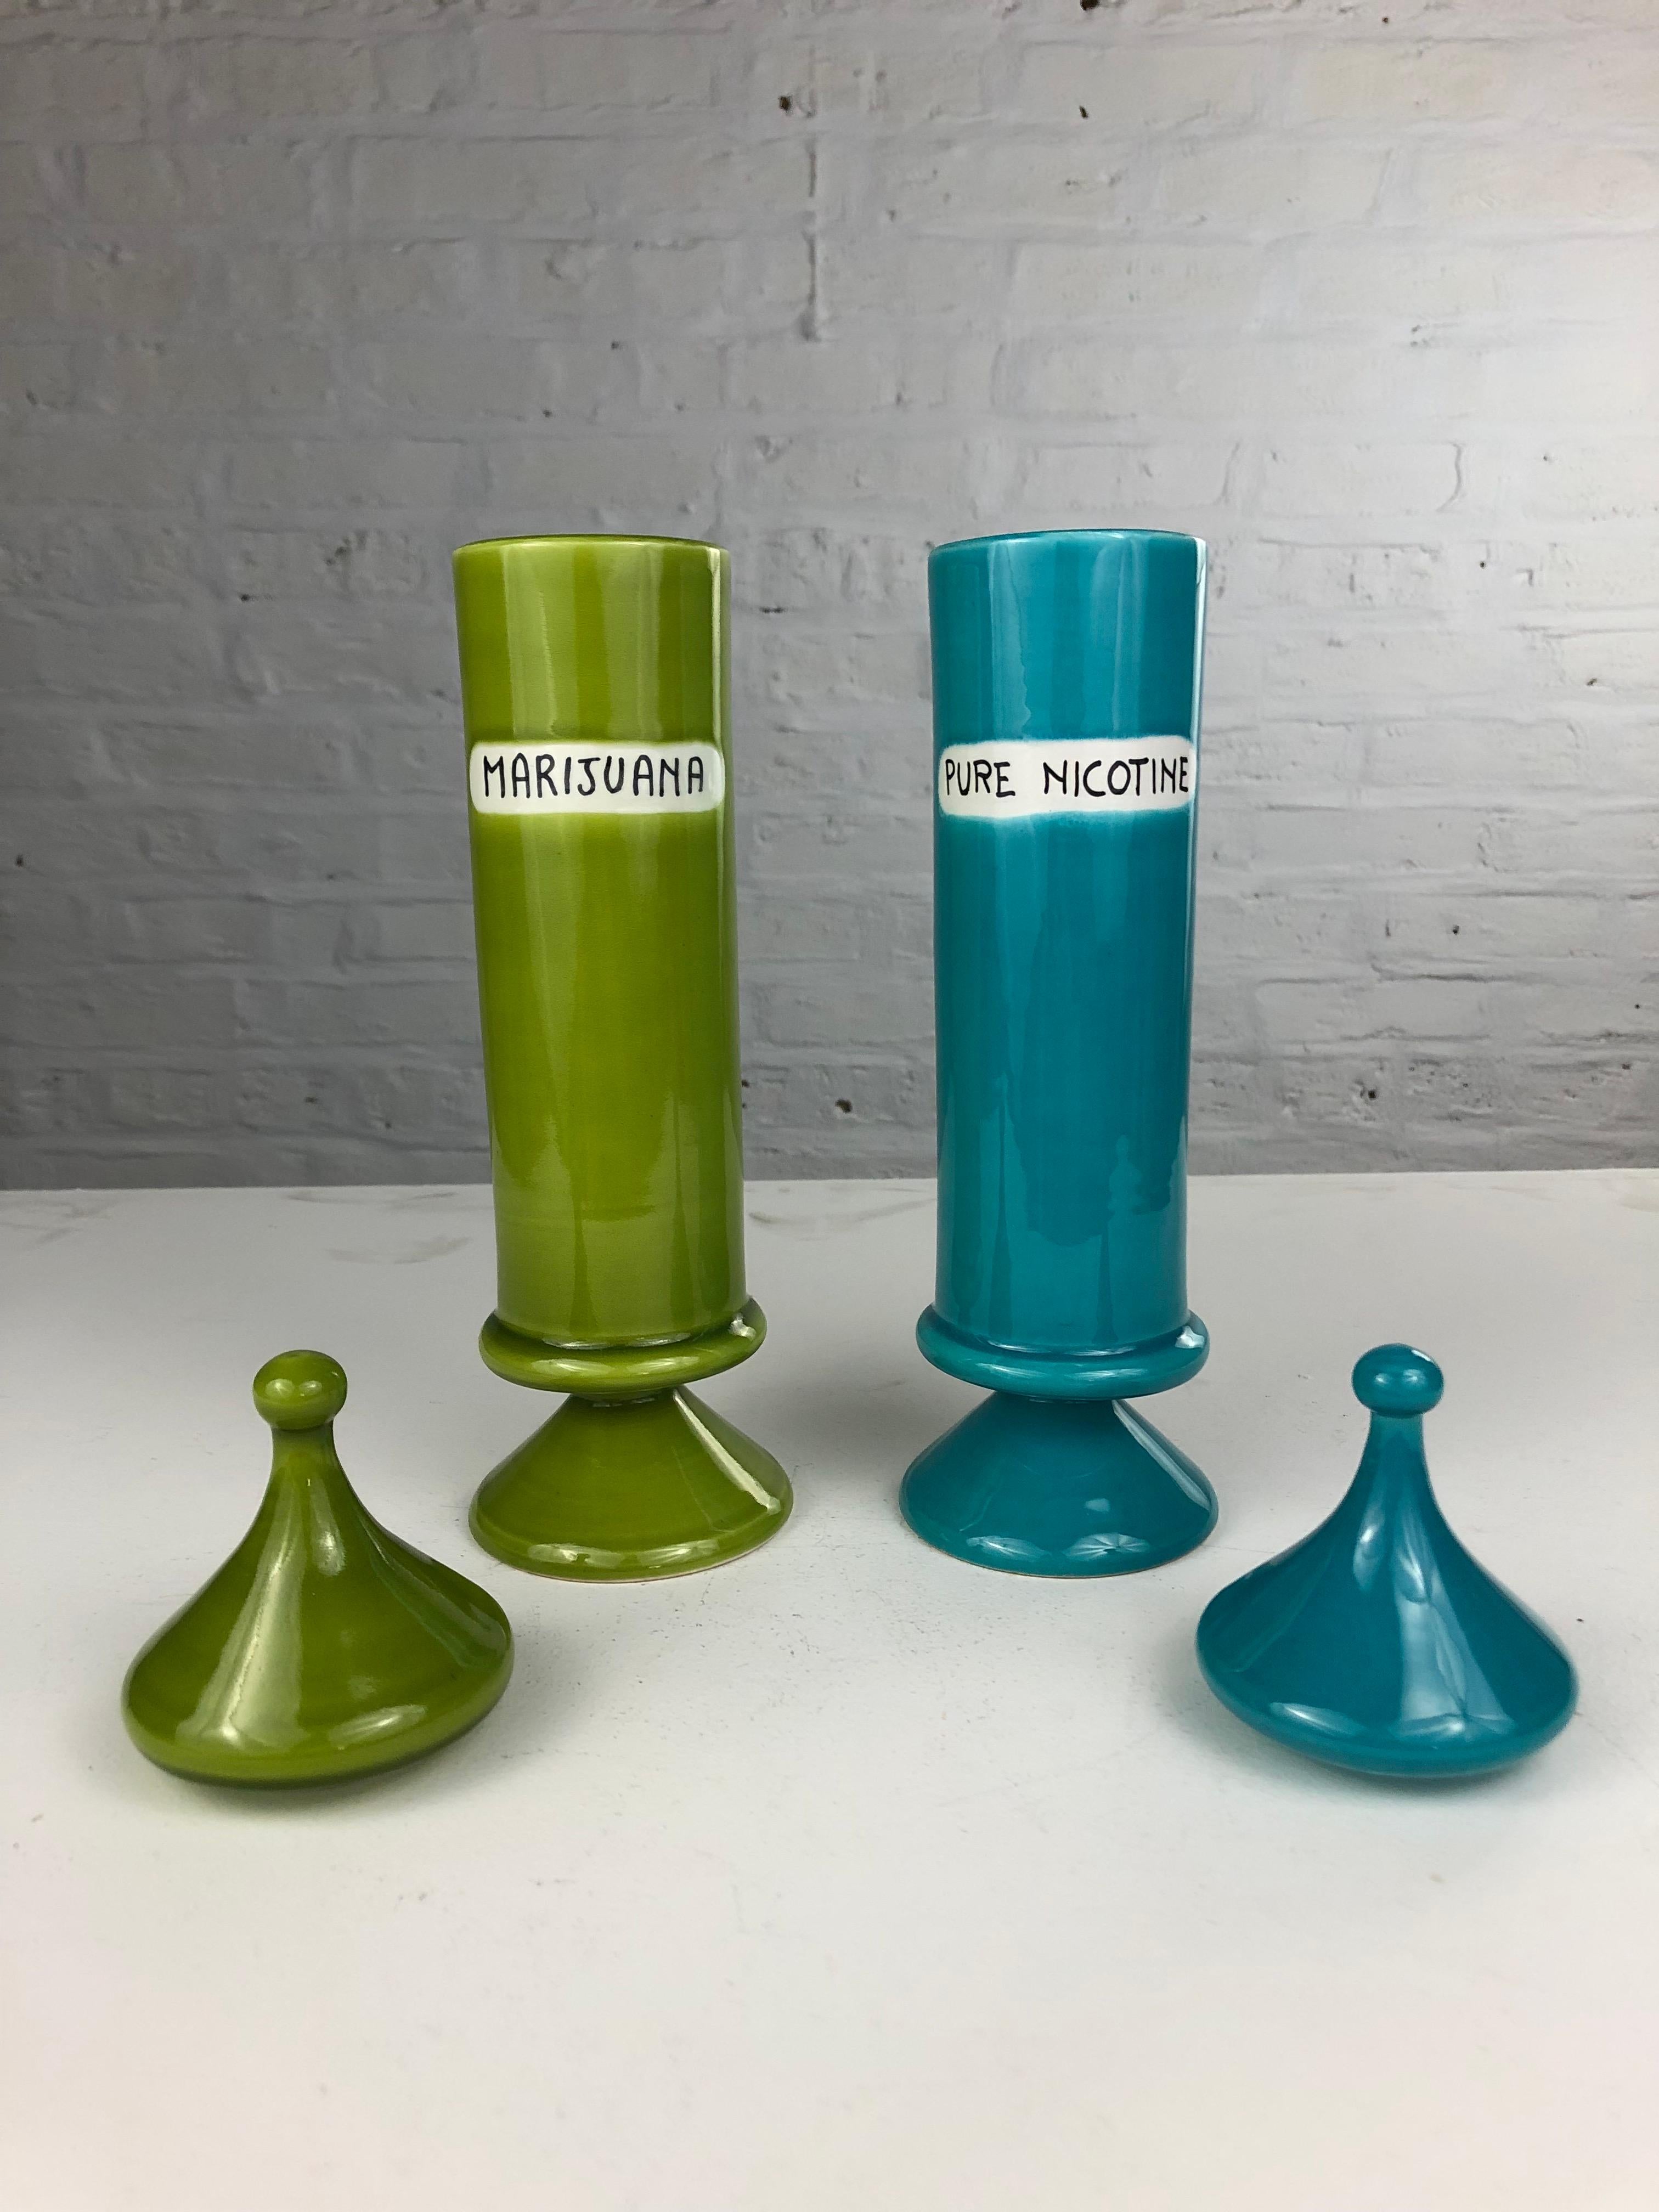 Raymor Vice Jars in bright green and blue, high glaze ceramic. Each jar is sold individually, with a price per jar, allowing collectors to curate their own unique set. Crafted in Italy by Bitossi exclusively for Raymor USA, these ceramic tall and